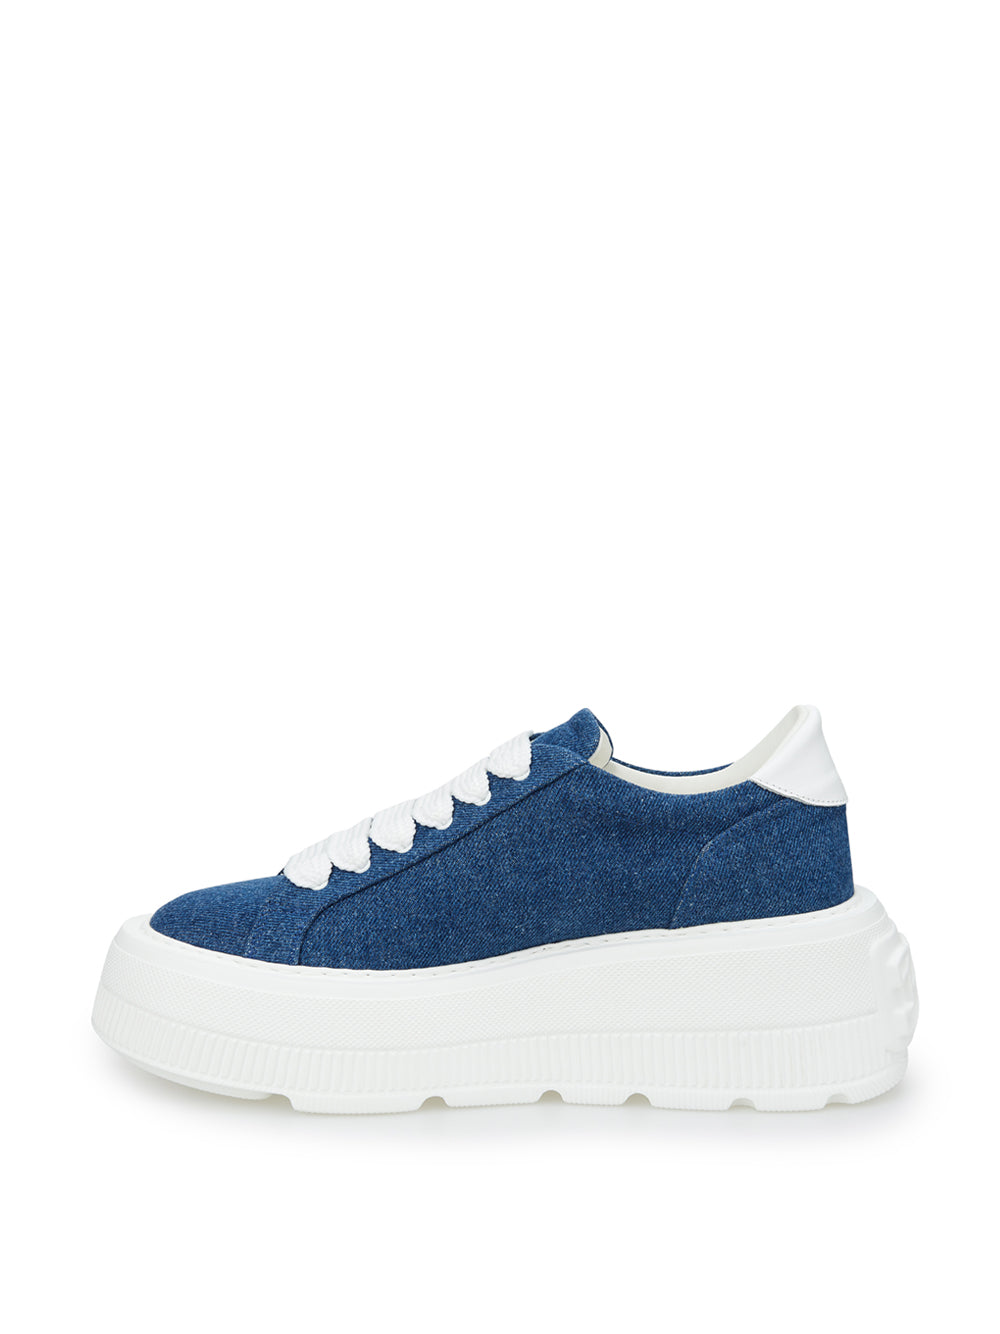 Casadei Elevate Your Style with Chic Denim Platform Sneakers